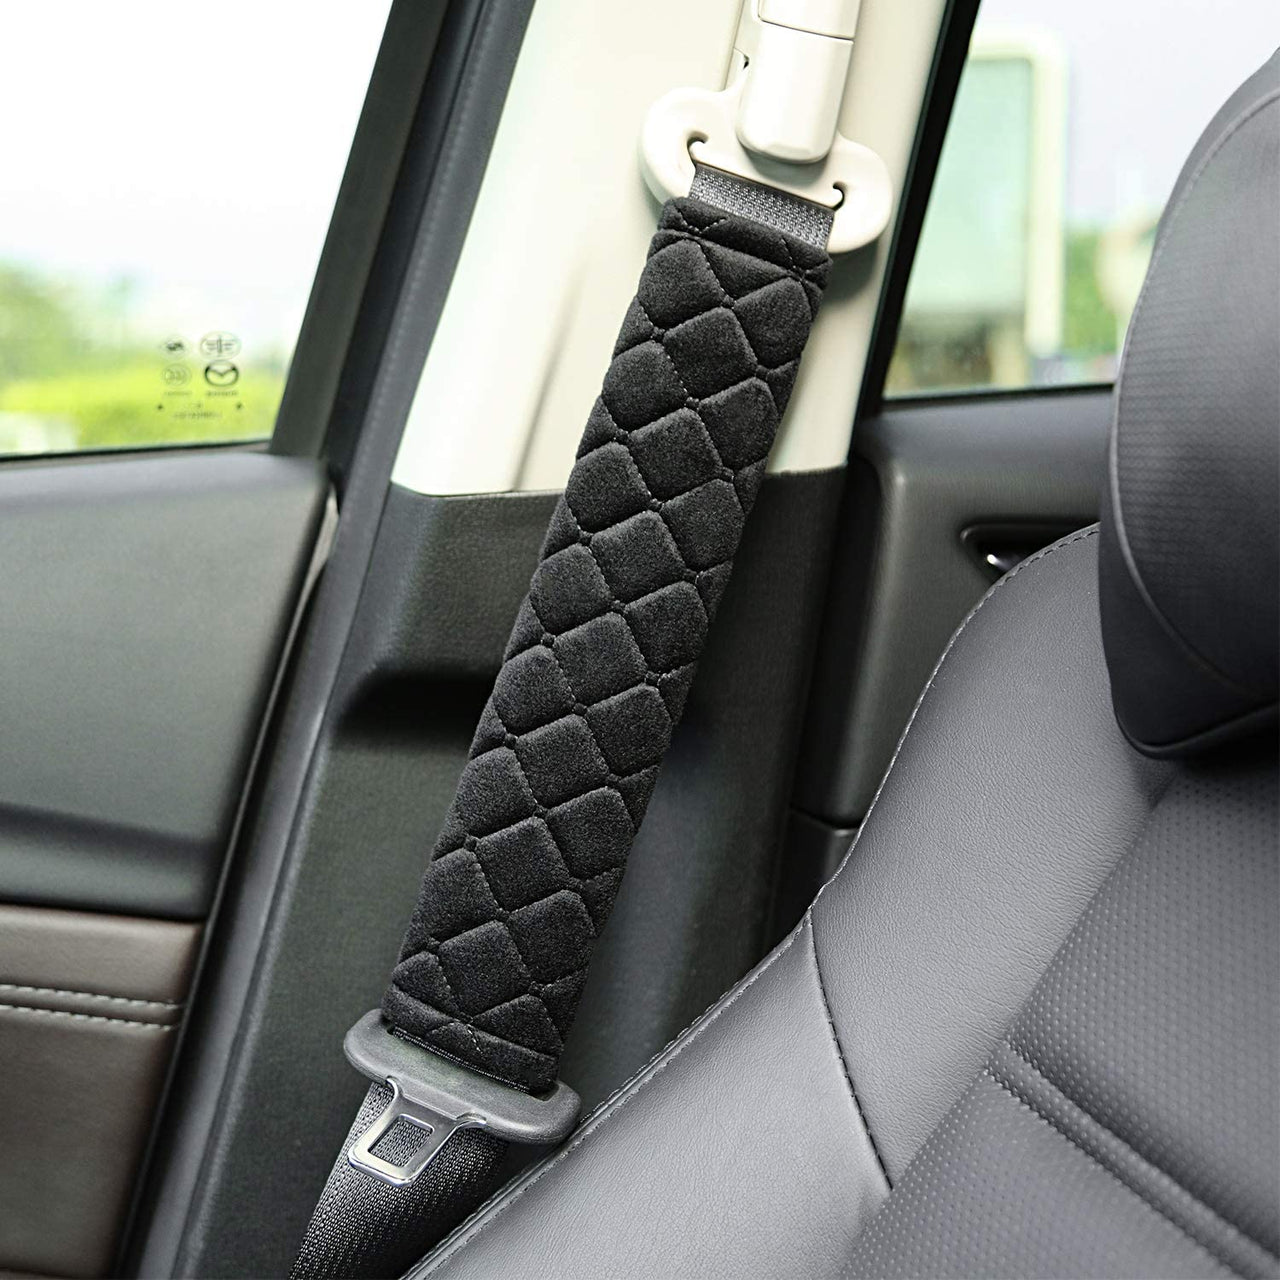 4 Pack Car Seat Belt Pads Seatbelt Protector Soft Comfort Seat Belt Shoulder Strap Covers Harness Pads Helps Protect Your Neck and Shoulder Universal Fit for All Cars